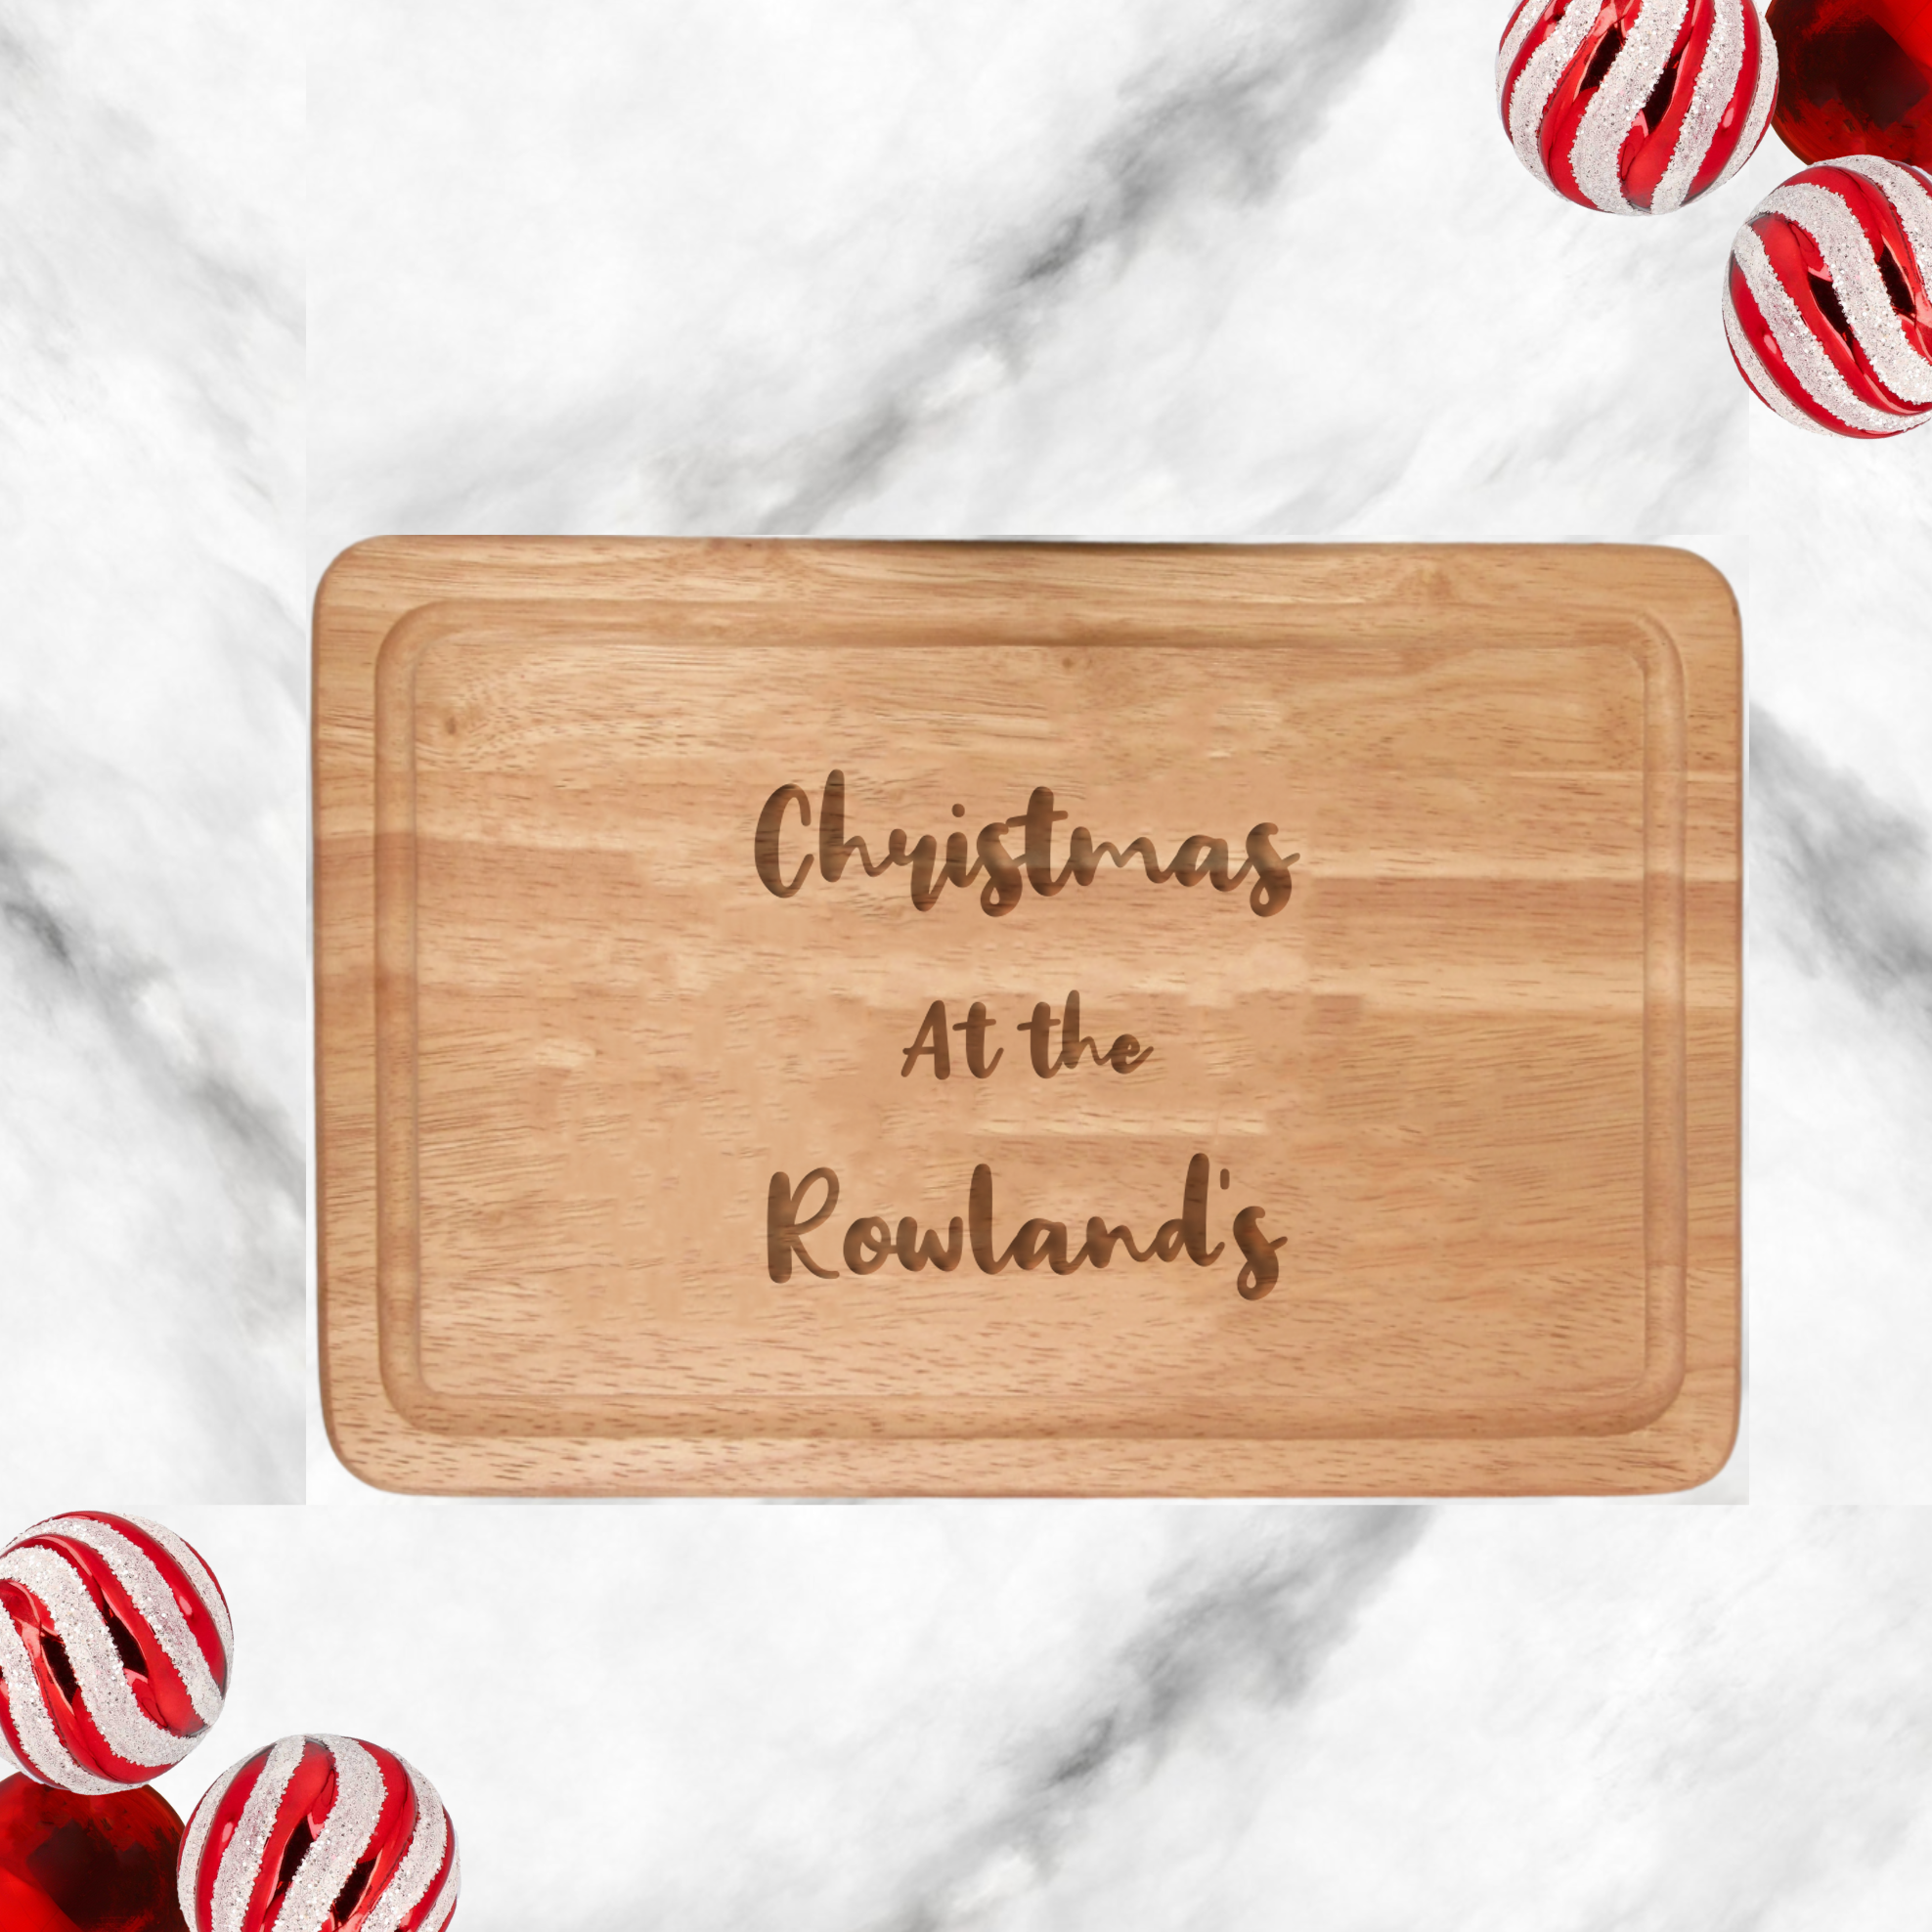 Impress your loved ones with our Personalised Christmas Chopping Board! Engraved with your family name on durable Beech Wood, this thoughtful and unique gift is perfect for special occasions. Show them you care with this one-of-a-kind present, made with love and attention to detail. 📦❤️ Measures 300mm x 200mm.